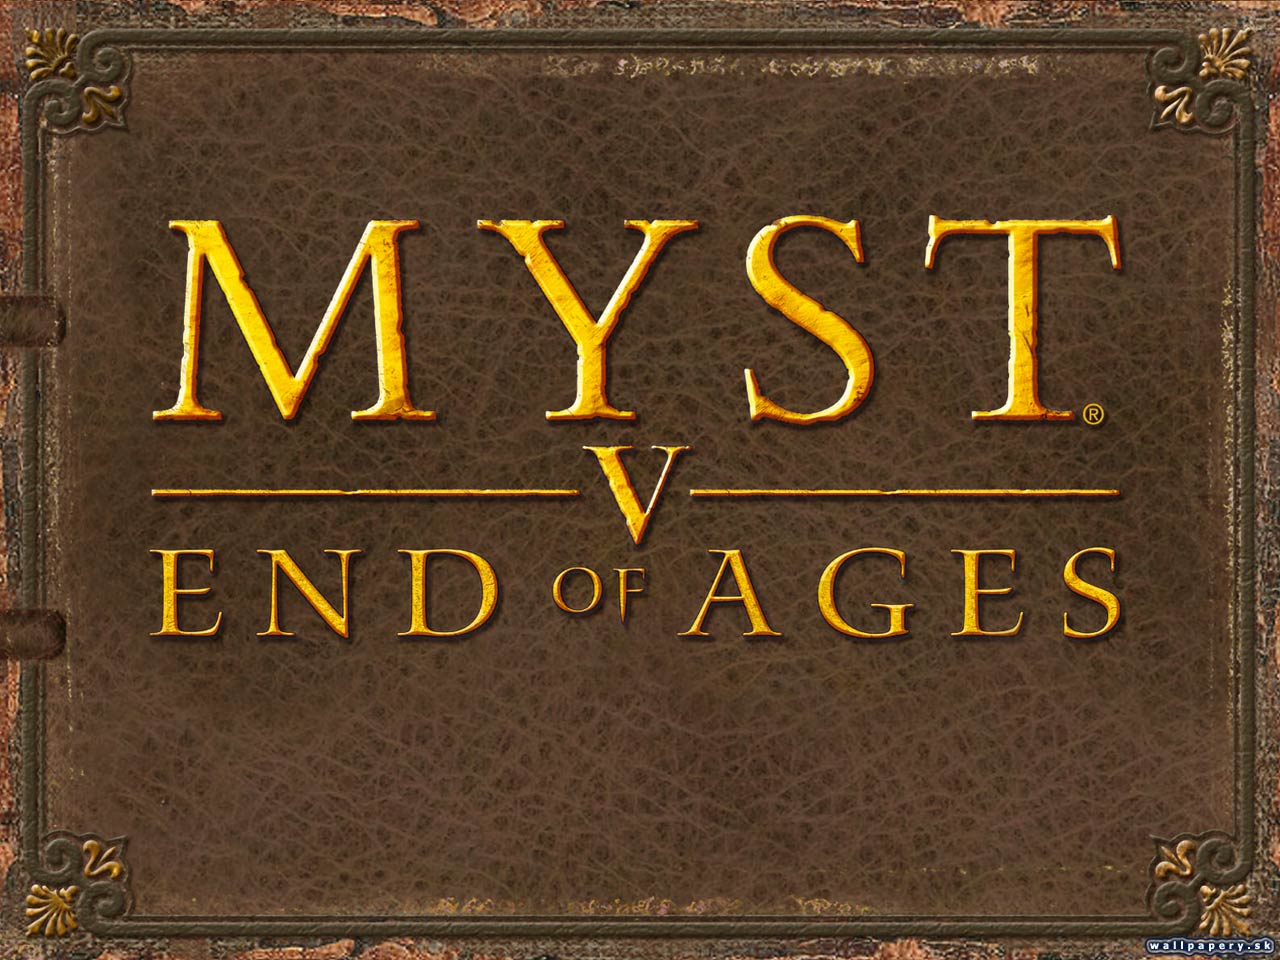 Myst 5: End of Ages - wallpaper 2